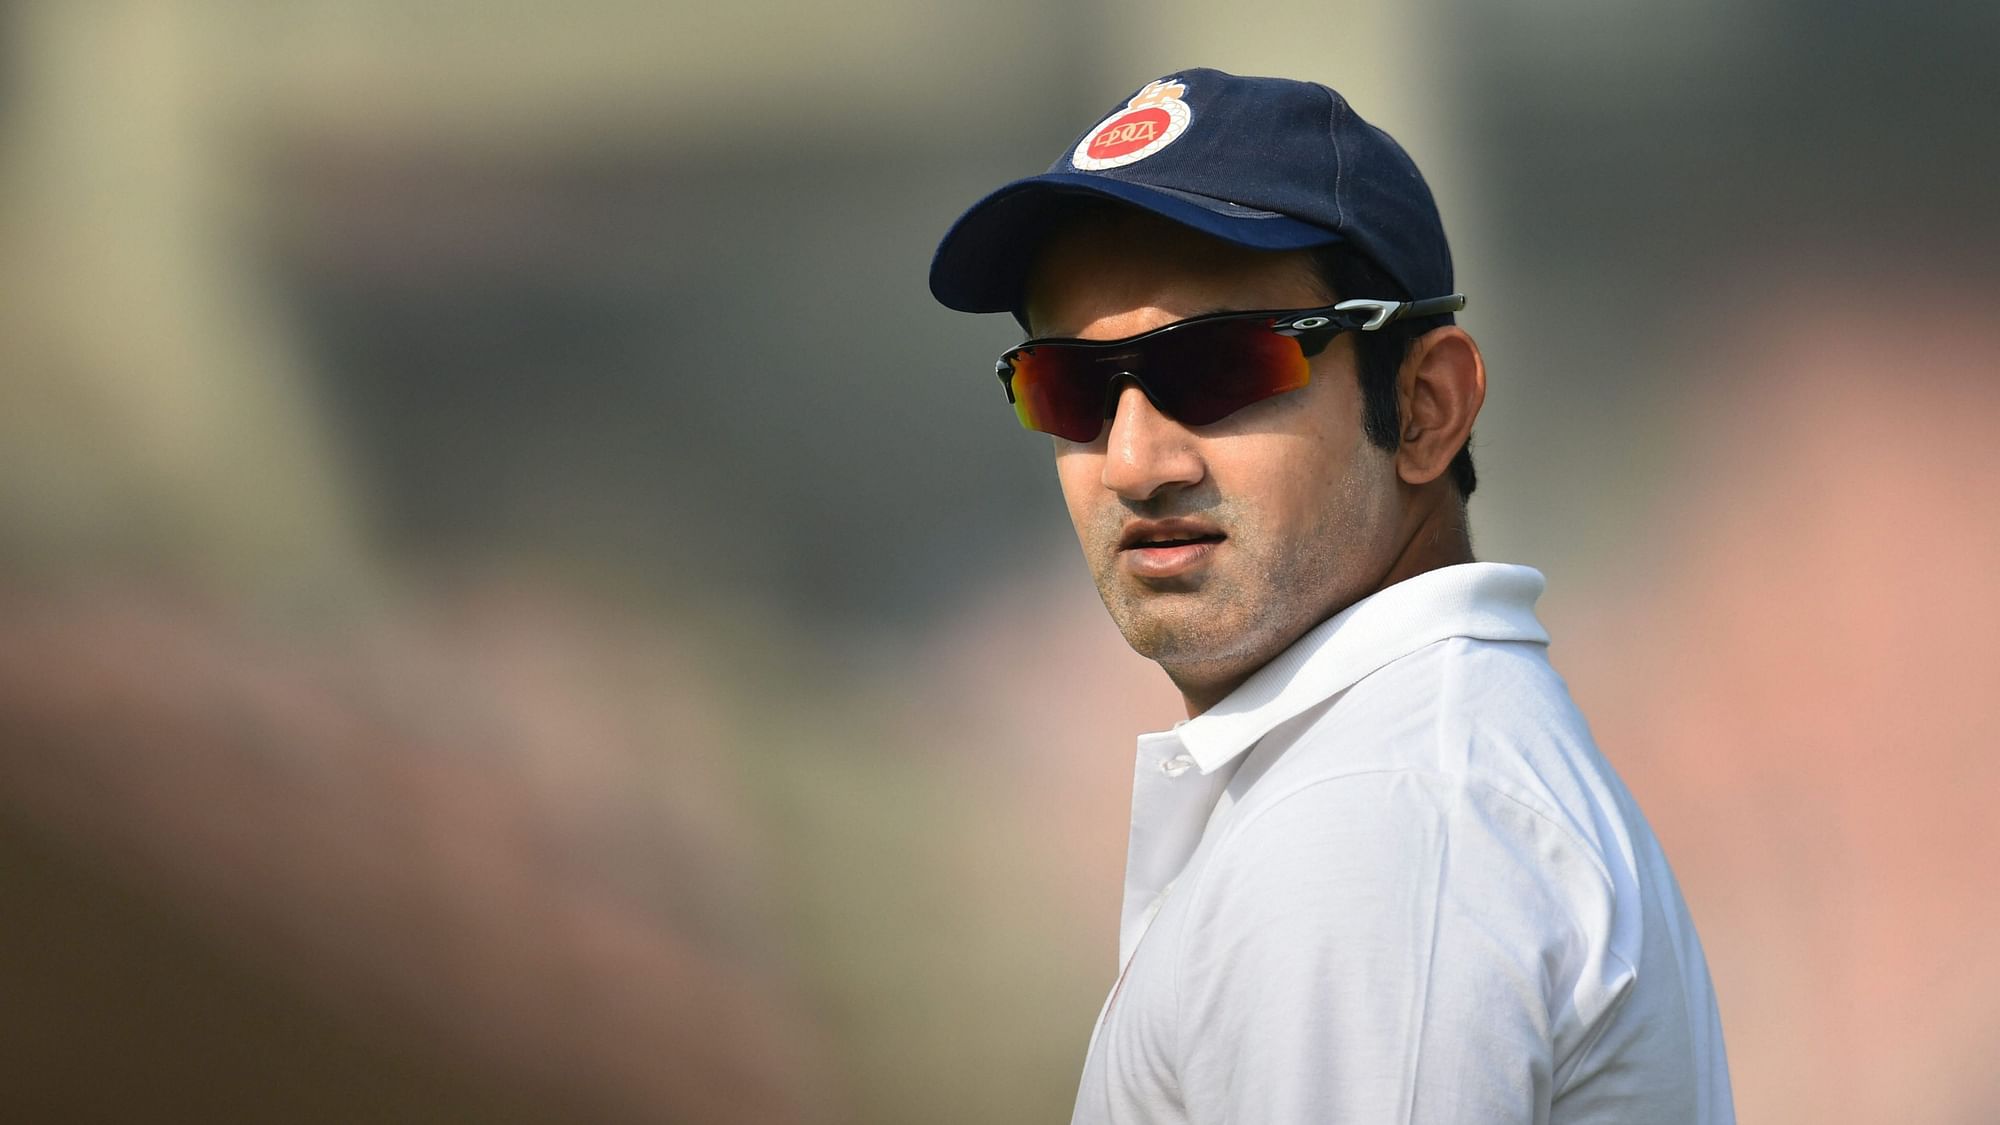 Gautam Gambhir has criticised the selection of players made by Kolkata Knight Riders (KKR) at the 2020 IPL auction.